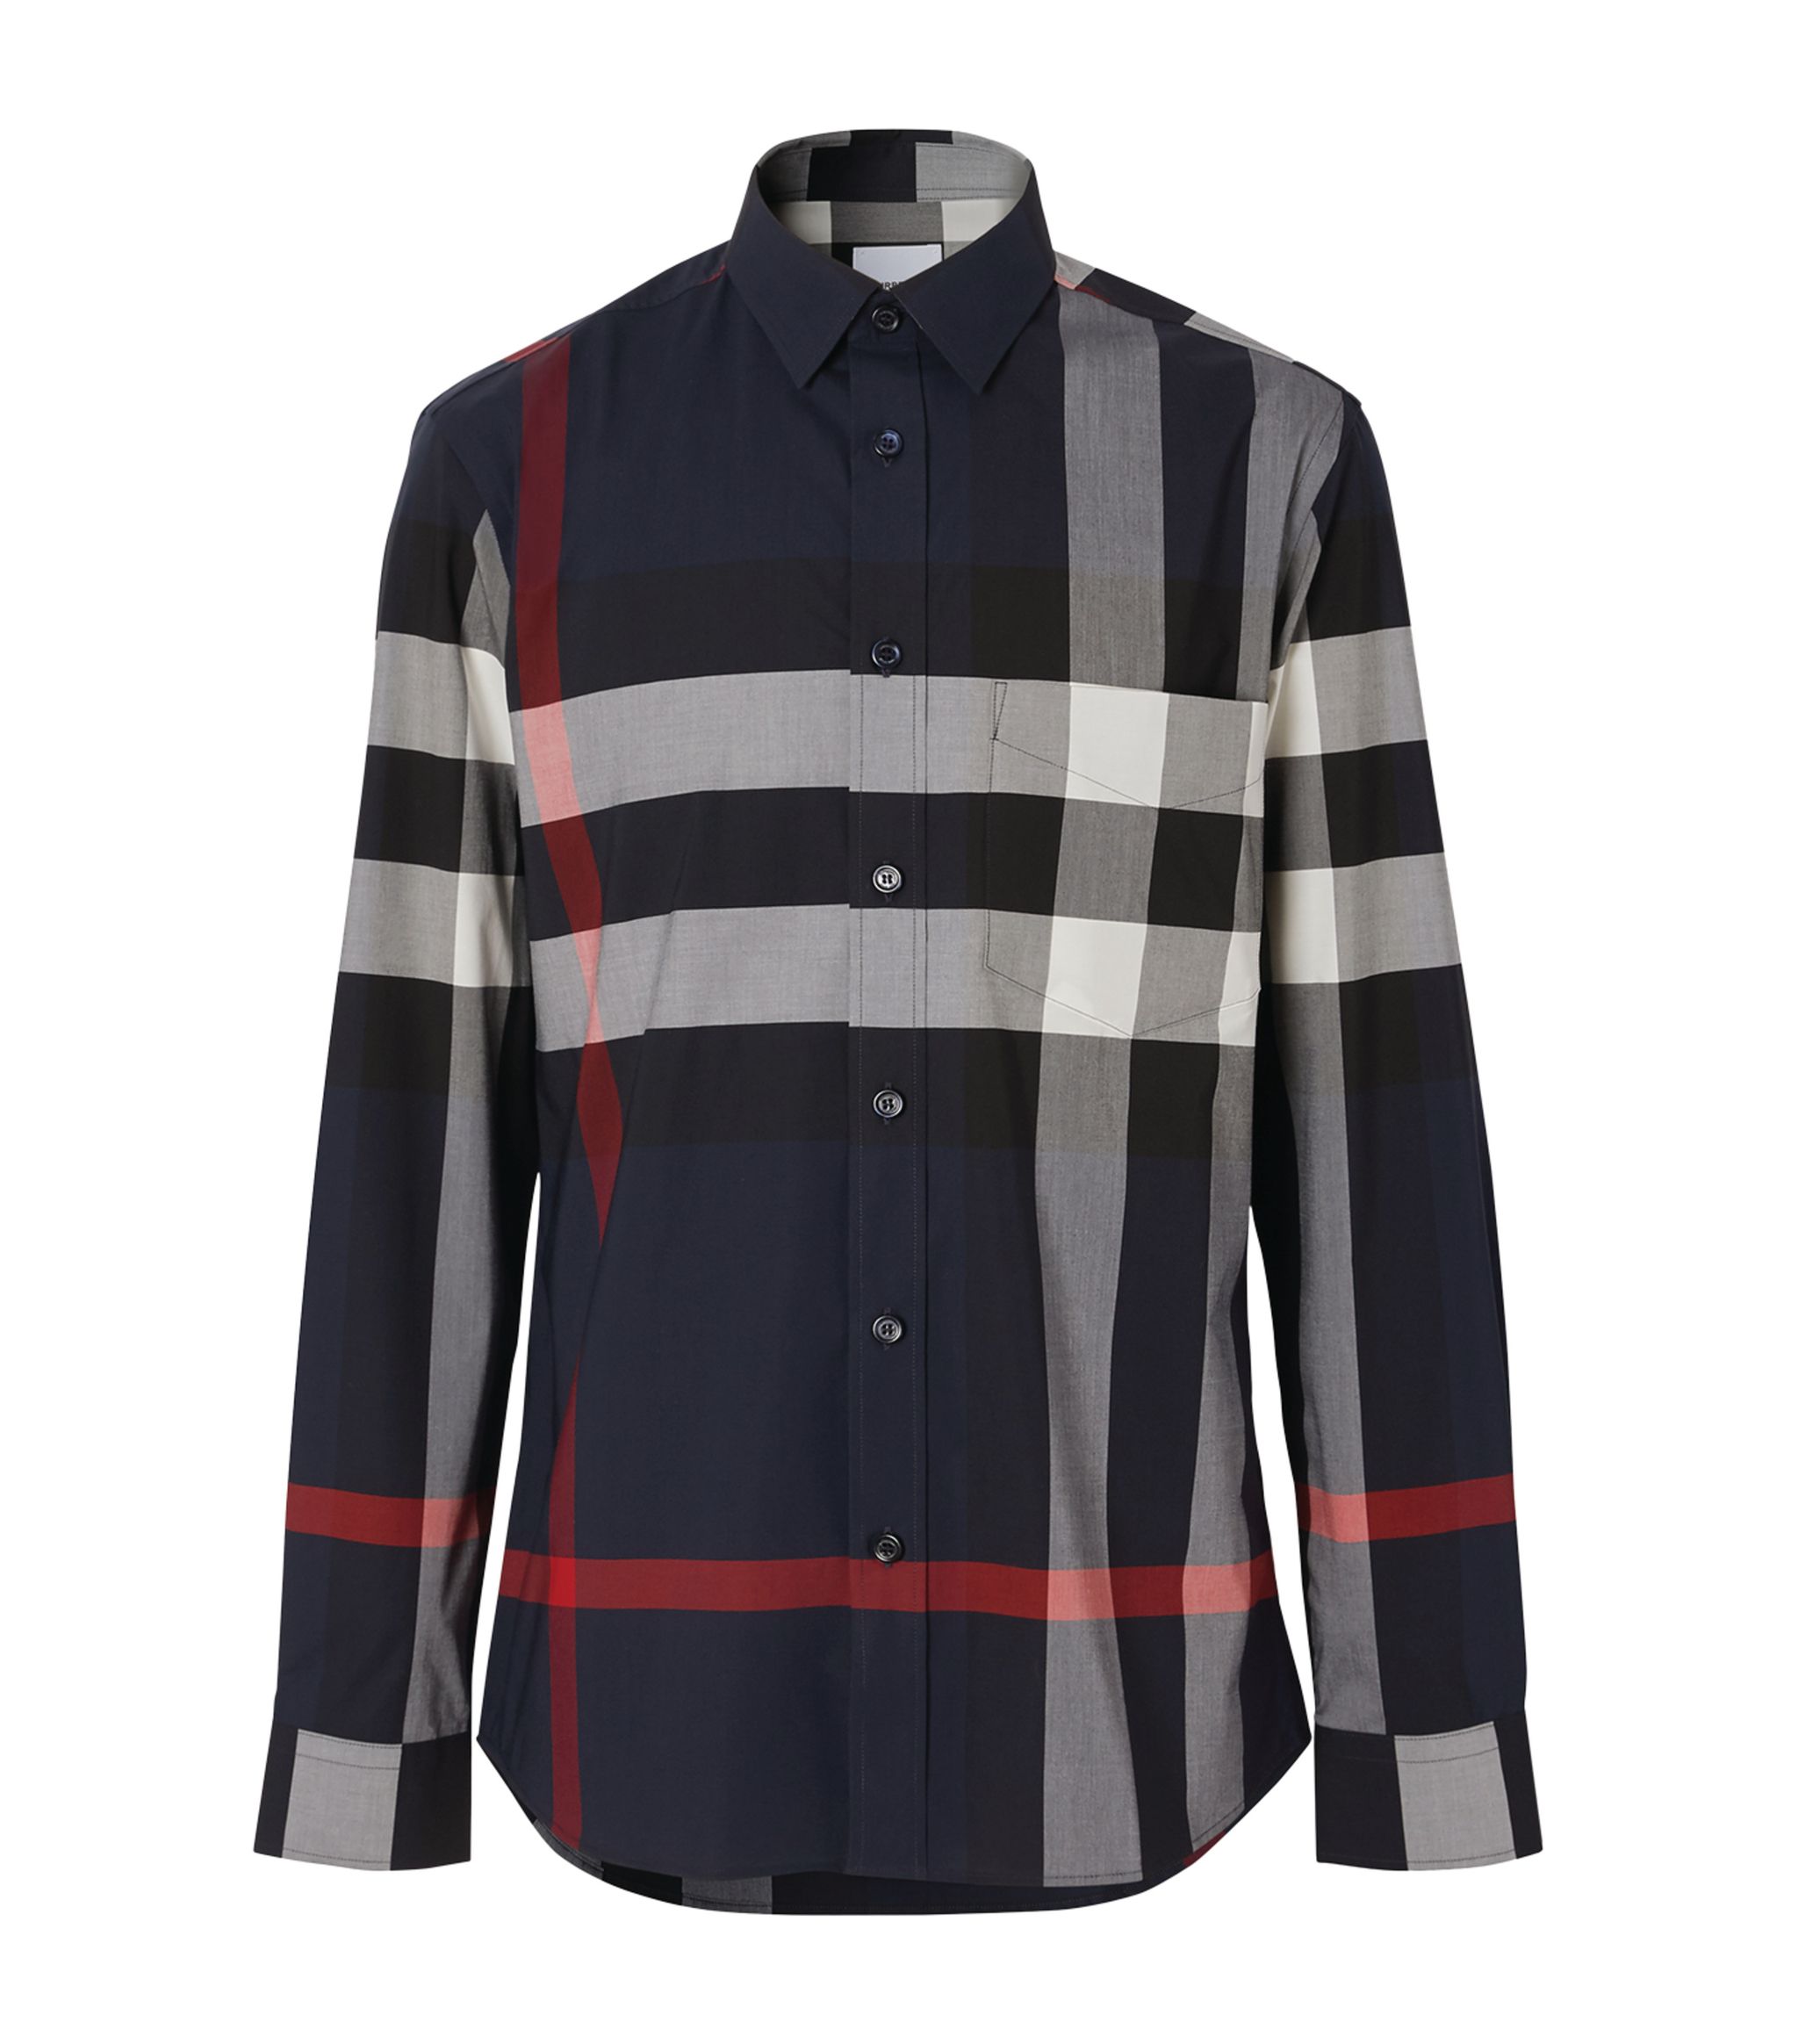 BURBERRY Burberry shirt in stretch cotton poplin with check pattern